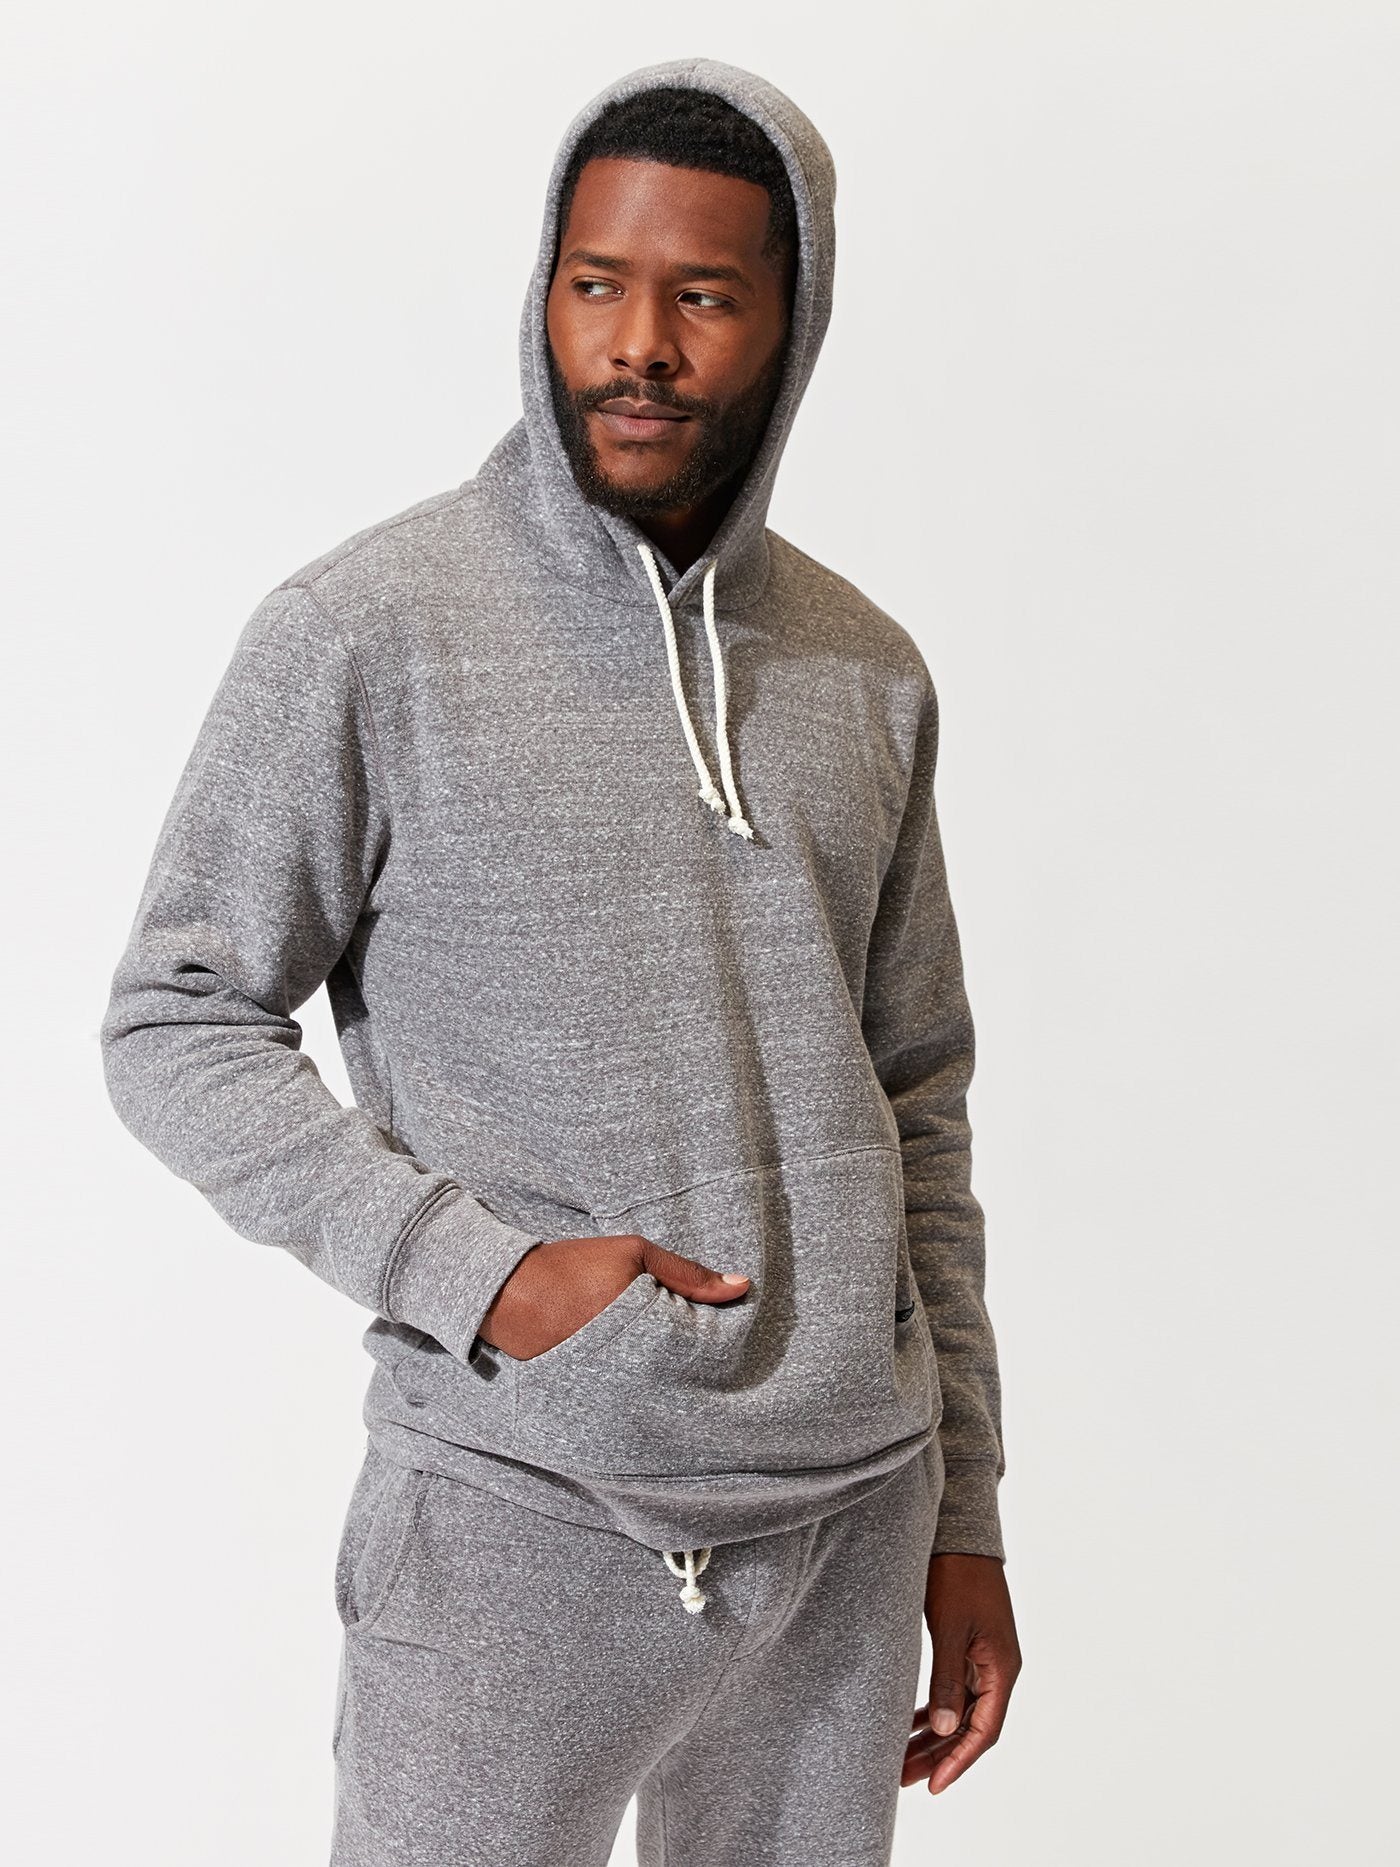 Heather Grey in Threads – Hoodie Triblend Pullover 4 Thought